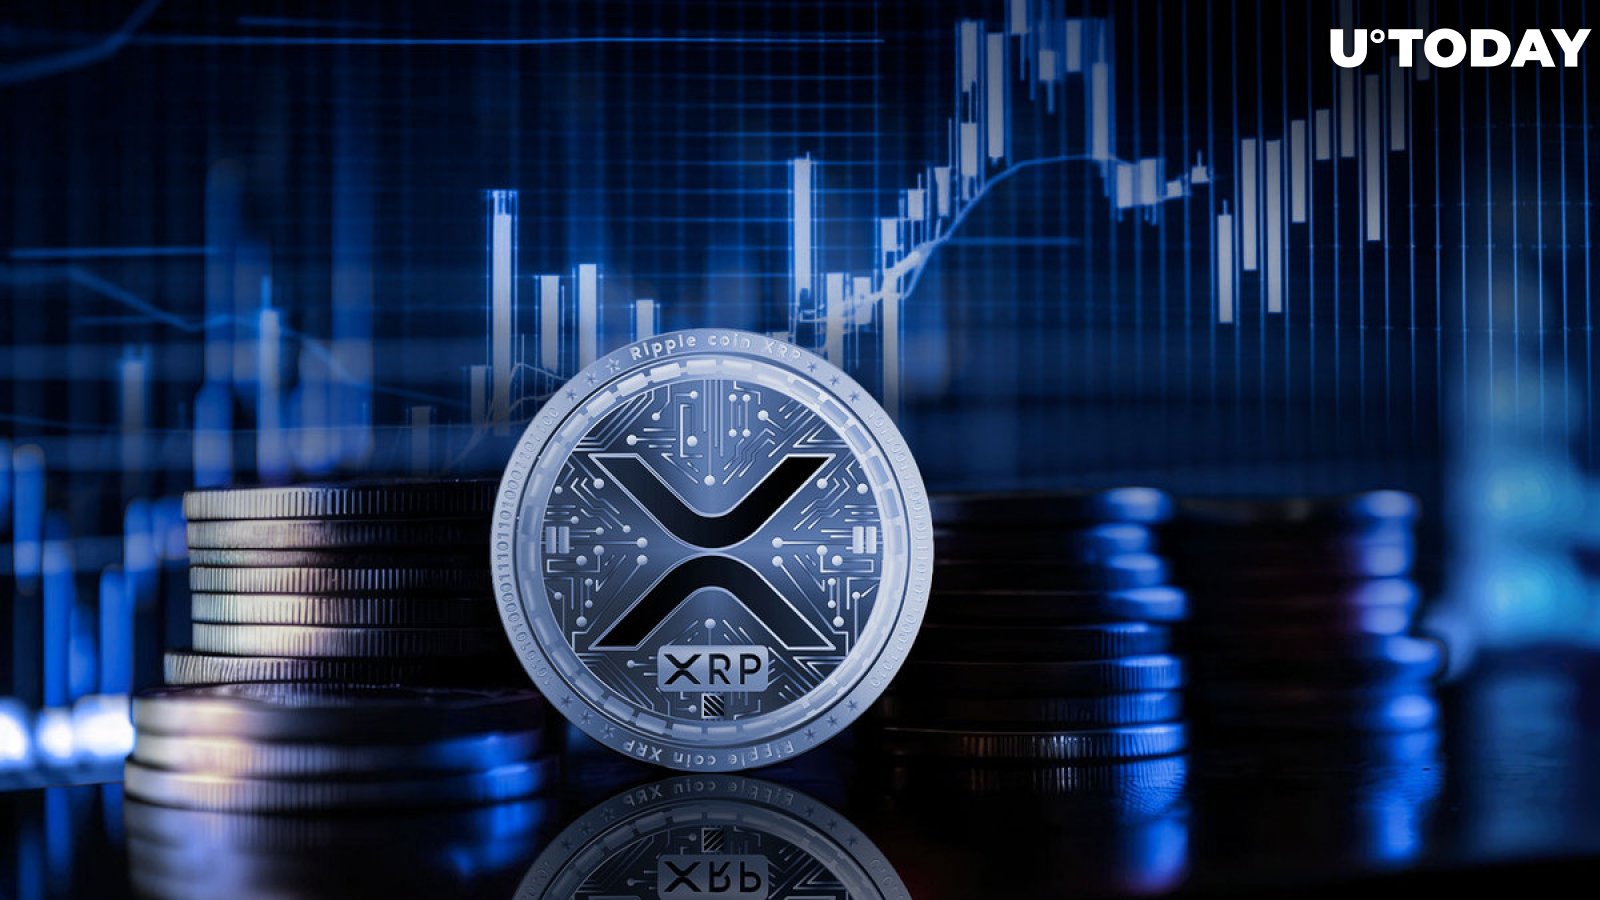 XRP Skyrockets 108% in Volume Amid $400 Million Crypto Market Sell-off